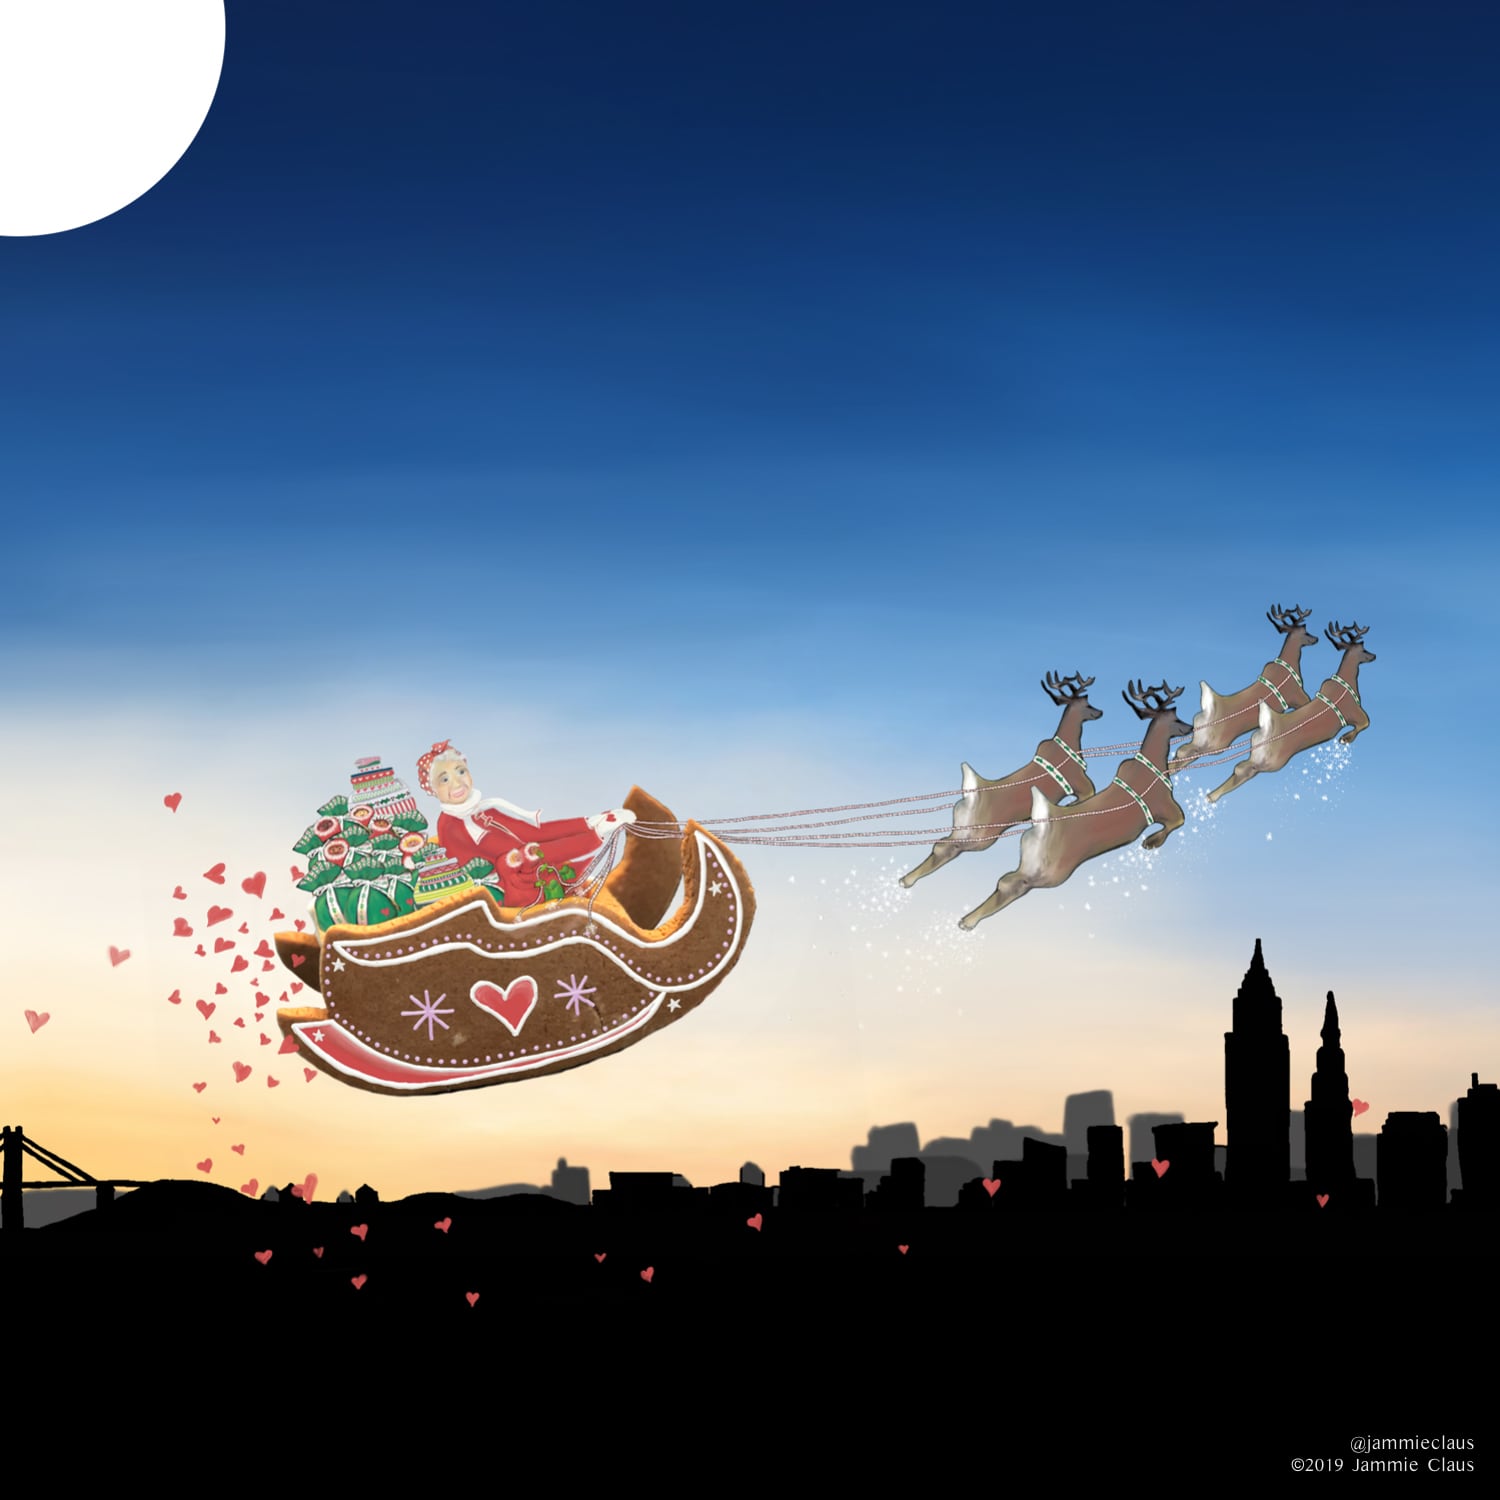 Jammie Claus and her Gingerbread Sleigh Flying in the Sky